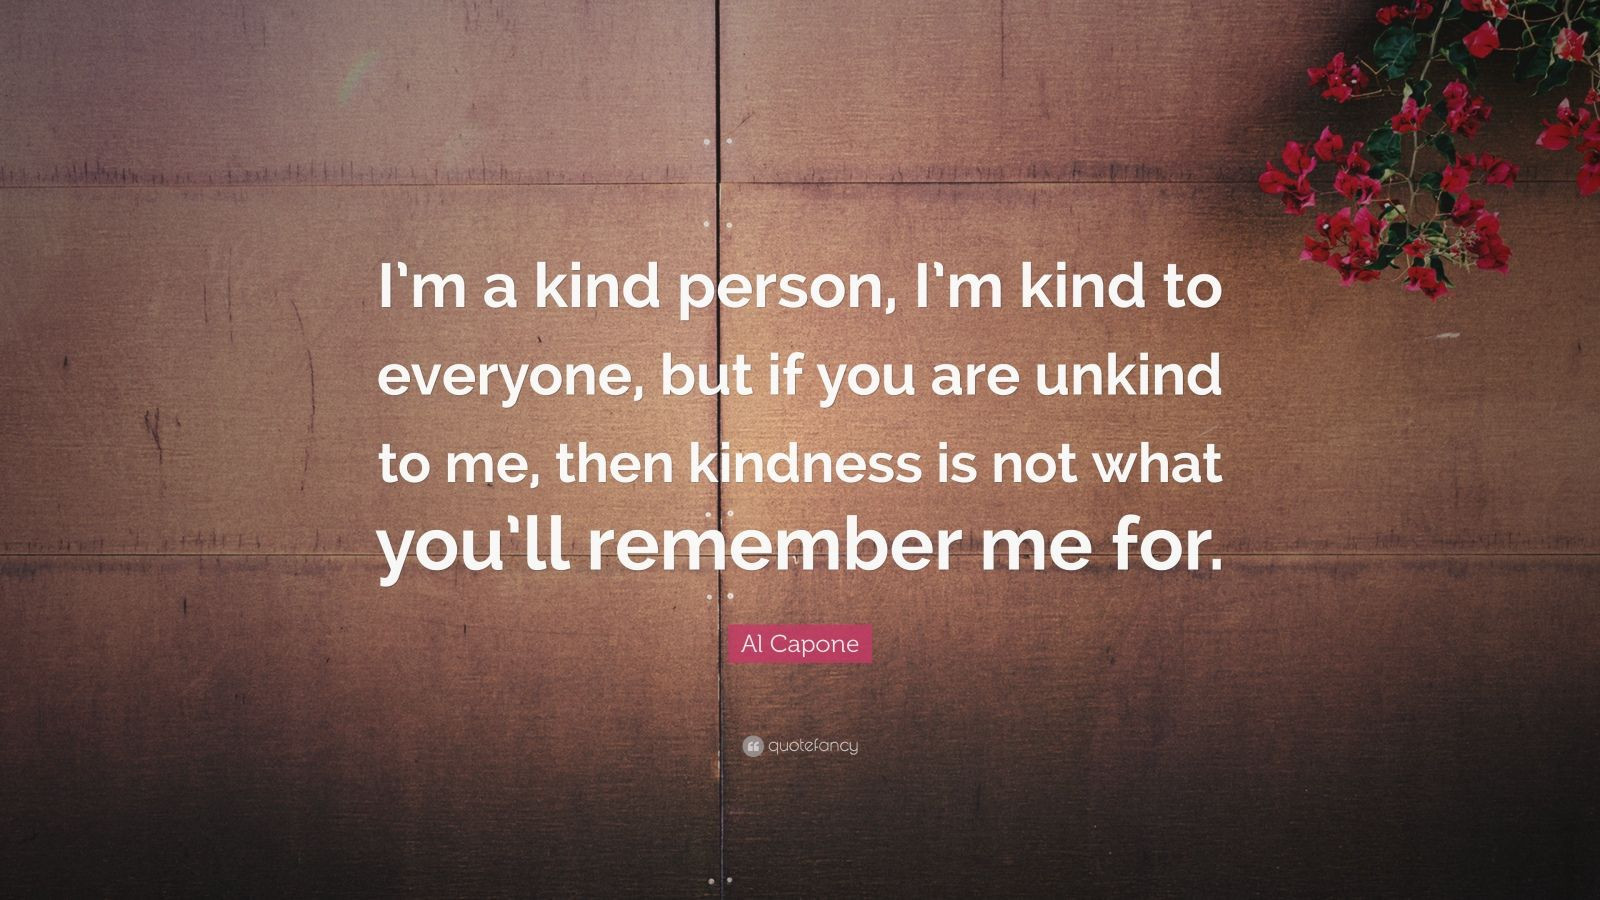 Al Capone Quote Kindness
 The top 24 Ideas About Al Capone Quotes Kindness Home